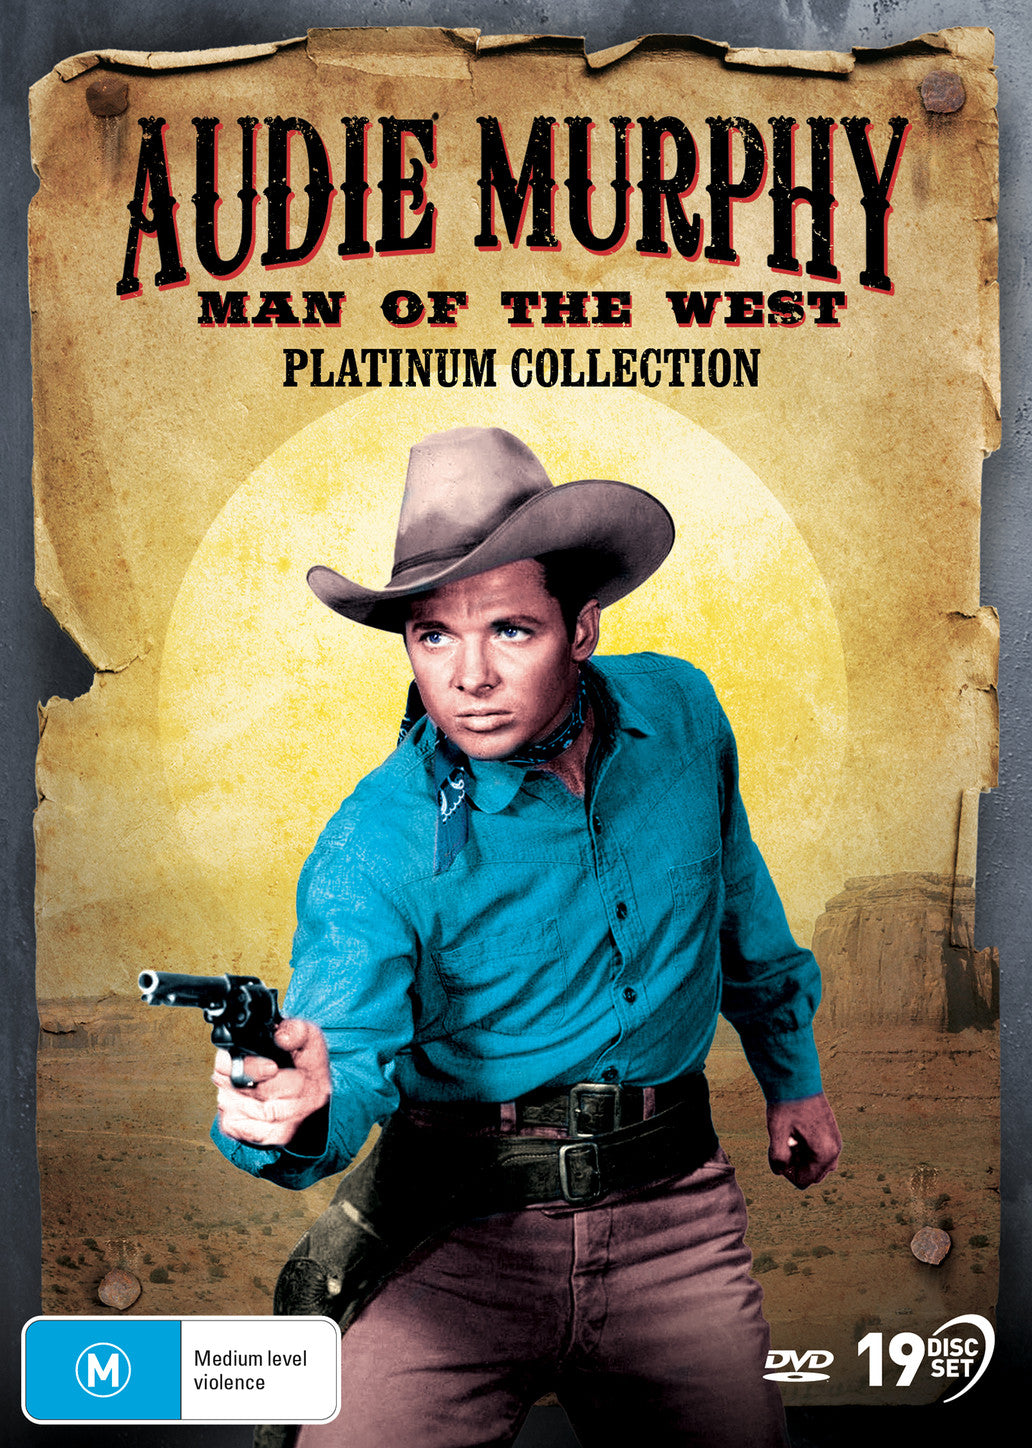 AUDIE MURPHY: MAN OF THE WEST - PLATINUM COLLECTION